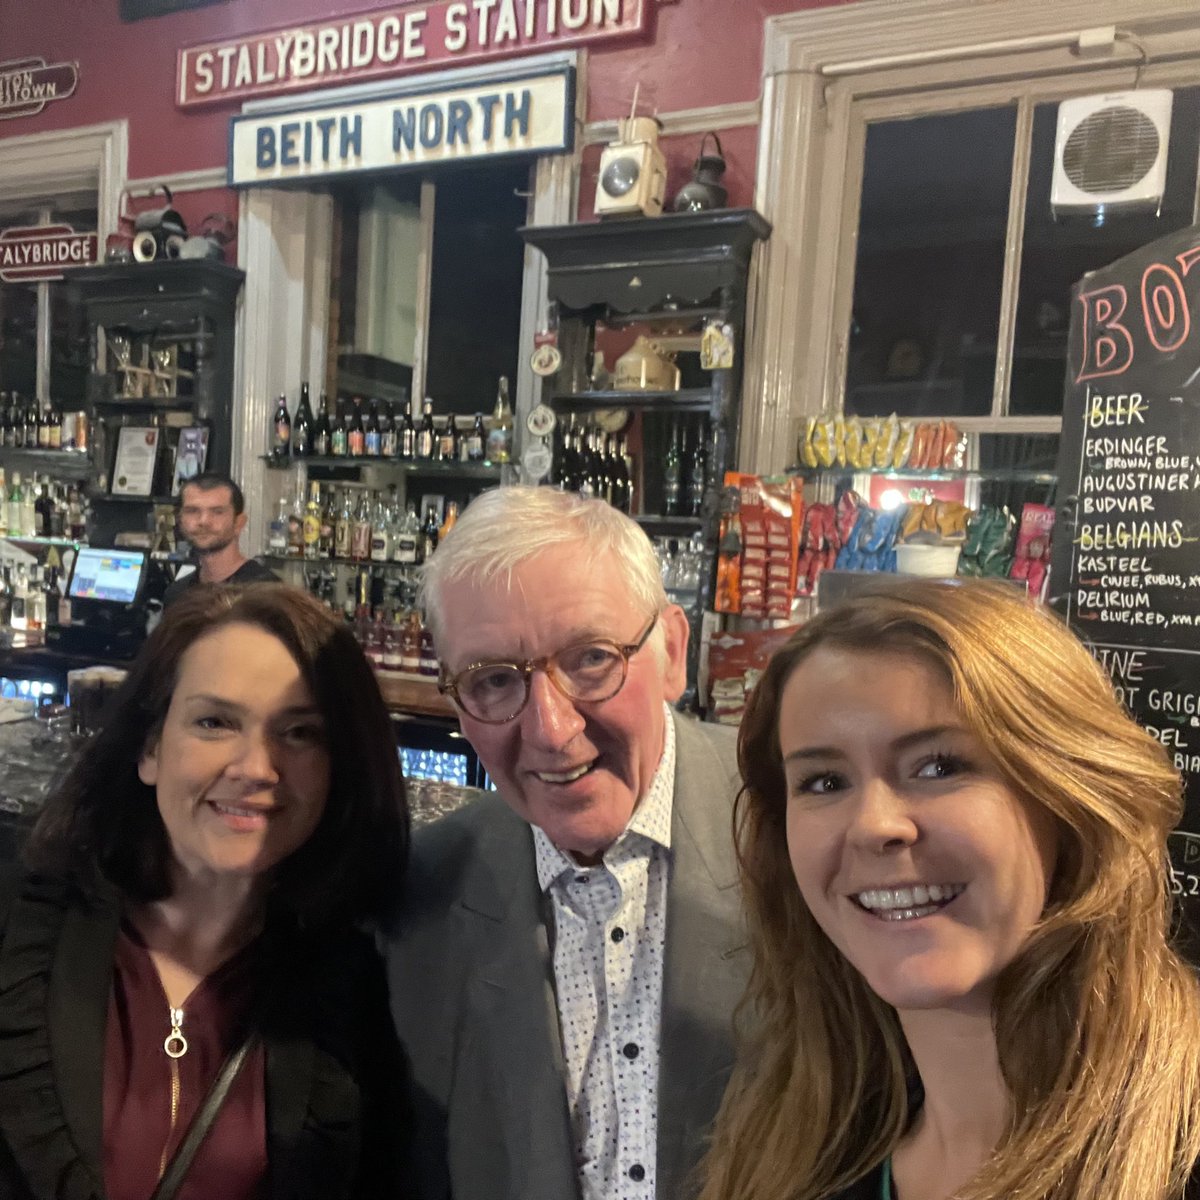 Thank you Gerard and Fiona @mcdermottkc_ for your hospitality during our trip to Manchester this week. A lovely dinner, a tour of Stalybridge and your offices, topped off by a drink in the quirky @Stalybuffetbar #HostwithMost